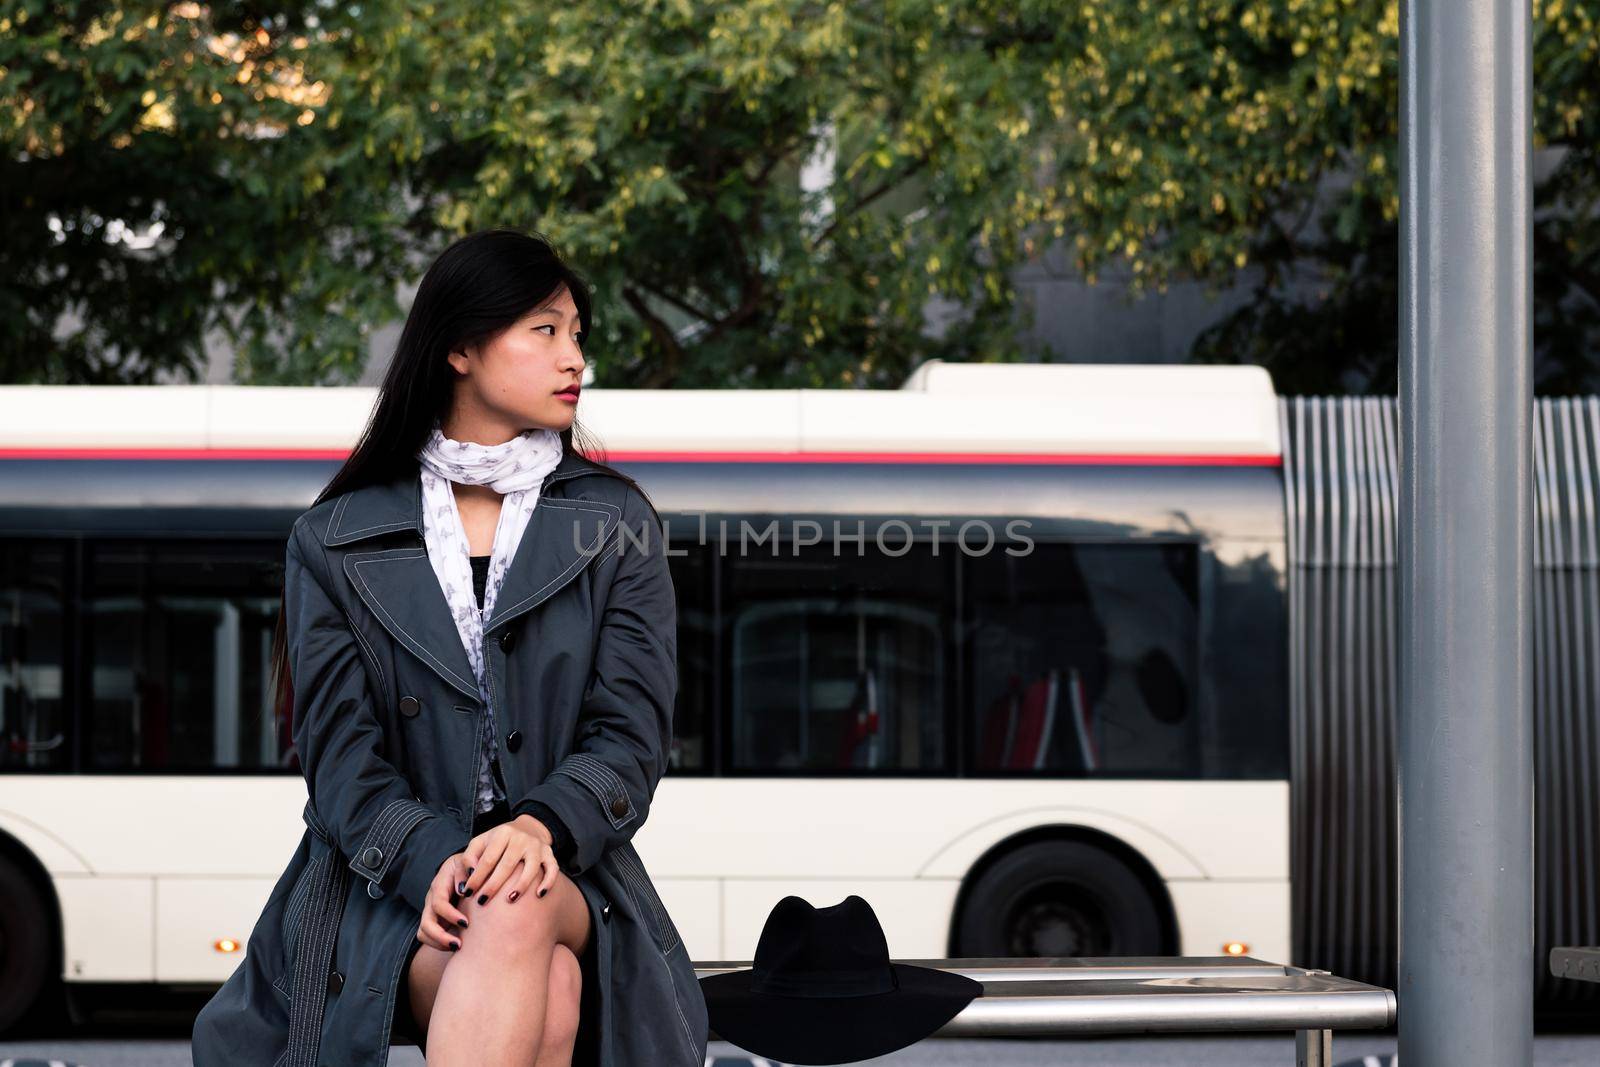 asian woman sitting and waiting for the bus al the bus stop, concept of public transportation and urban lifestyle